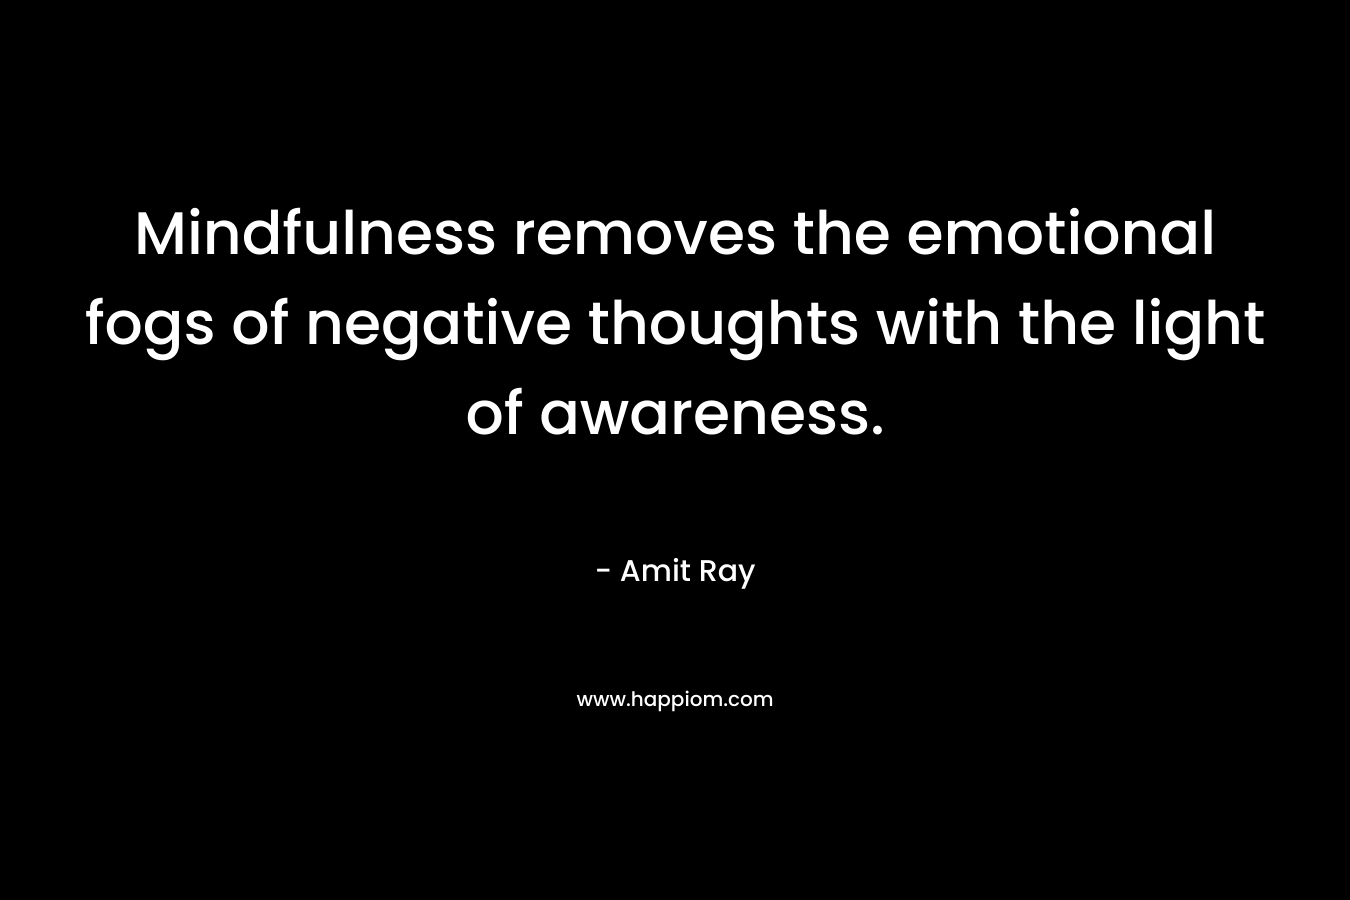 Mindfulness removes the emotional fogs of negative thoughts with the light of awareness. – Amit Ray